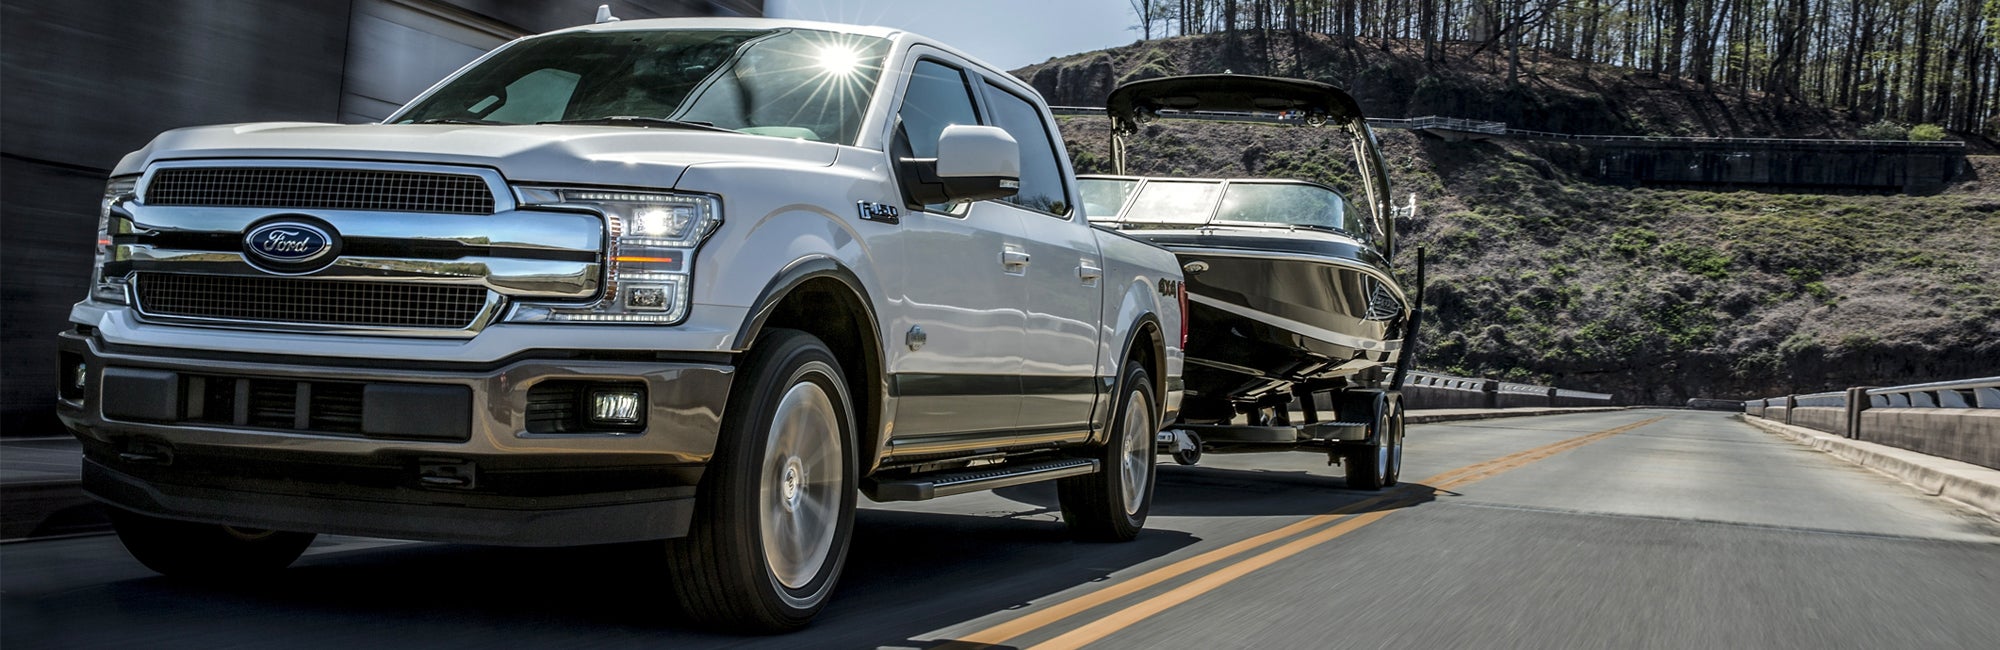 2020 Ford F-150 | Towing Capacity & More | Buss Ford 2020 Ford F 150 3.0 Diesel Towing Capacity